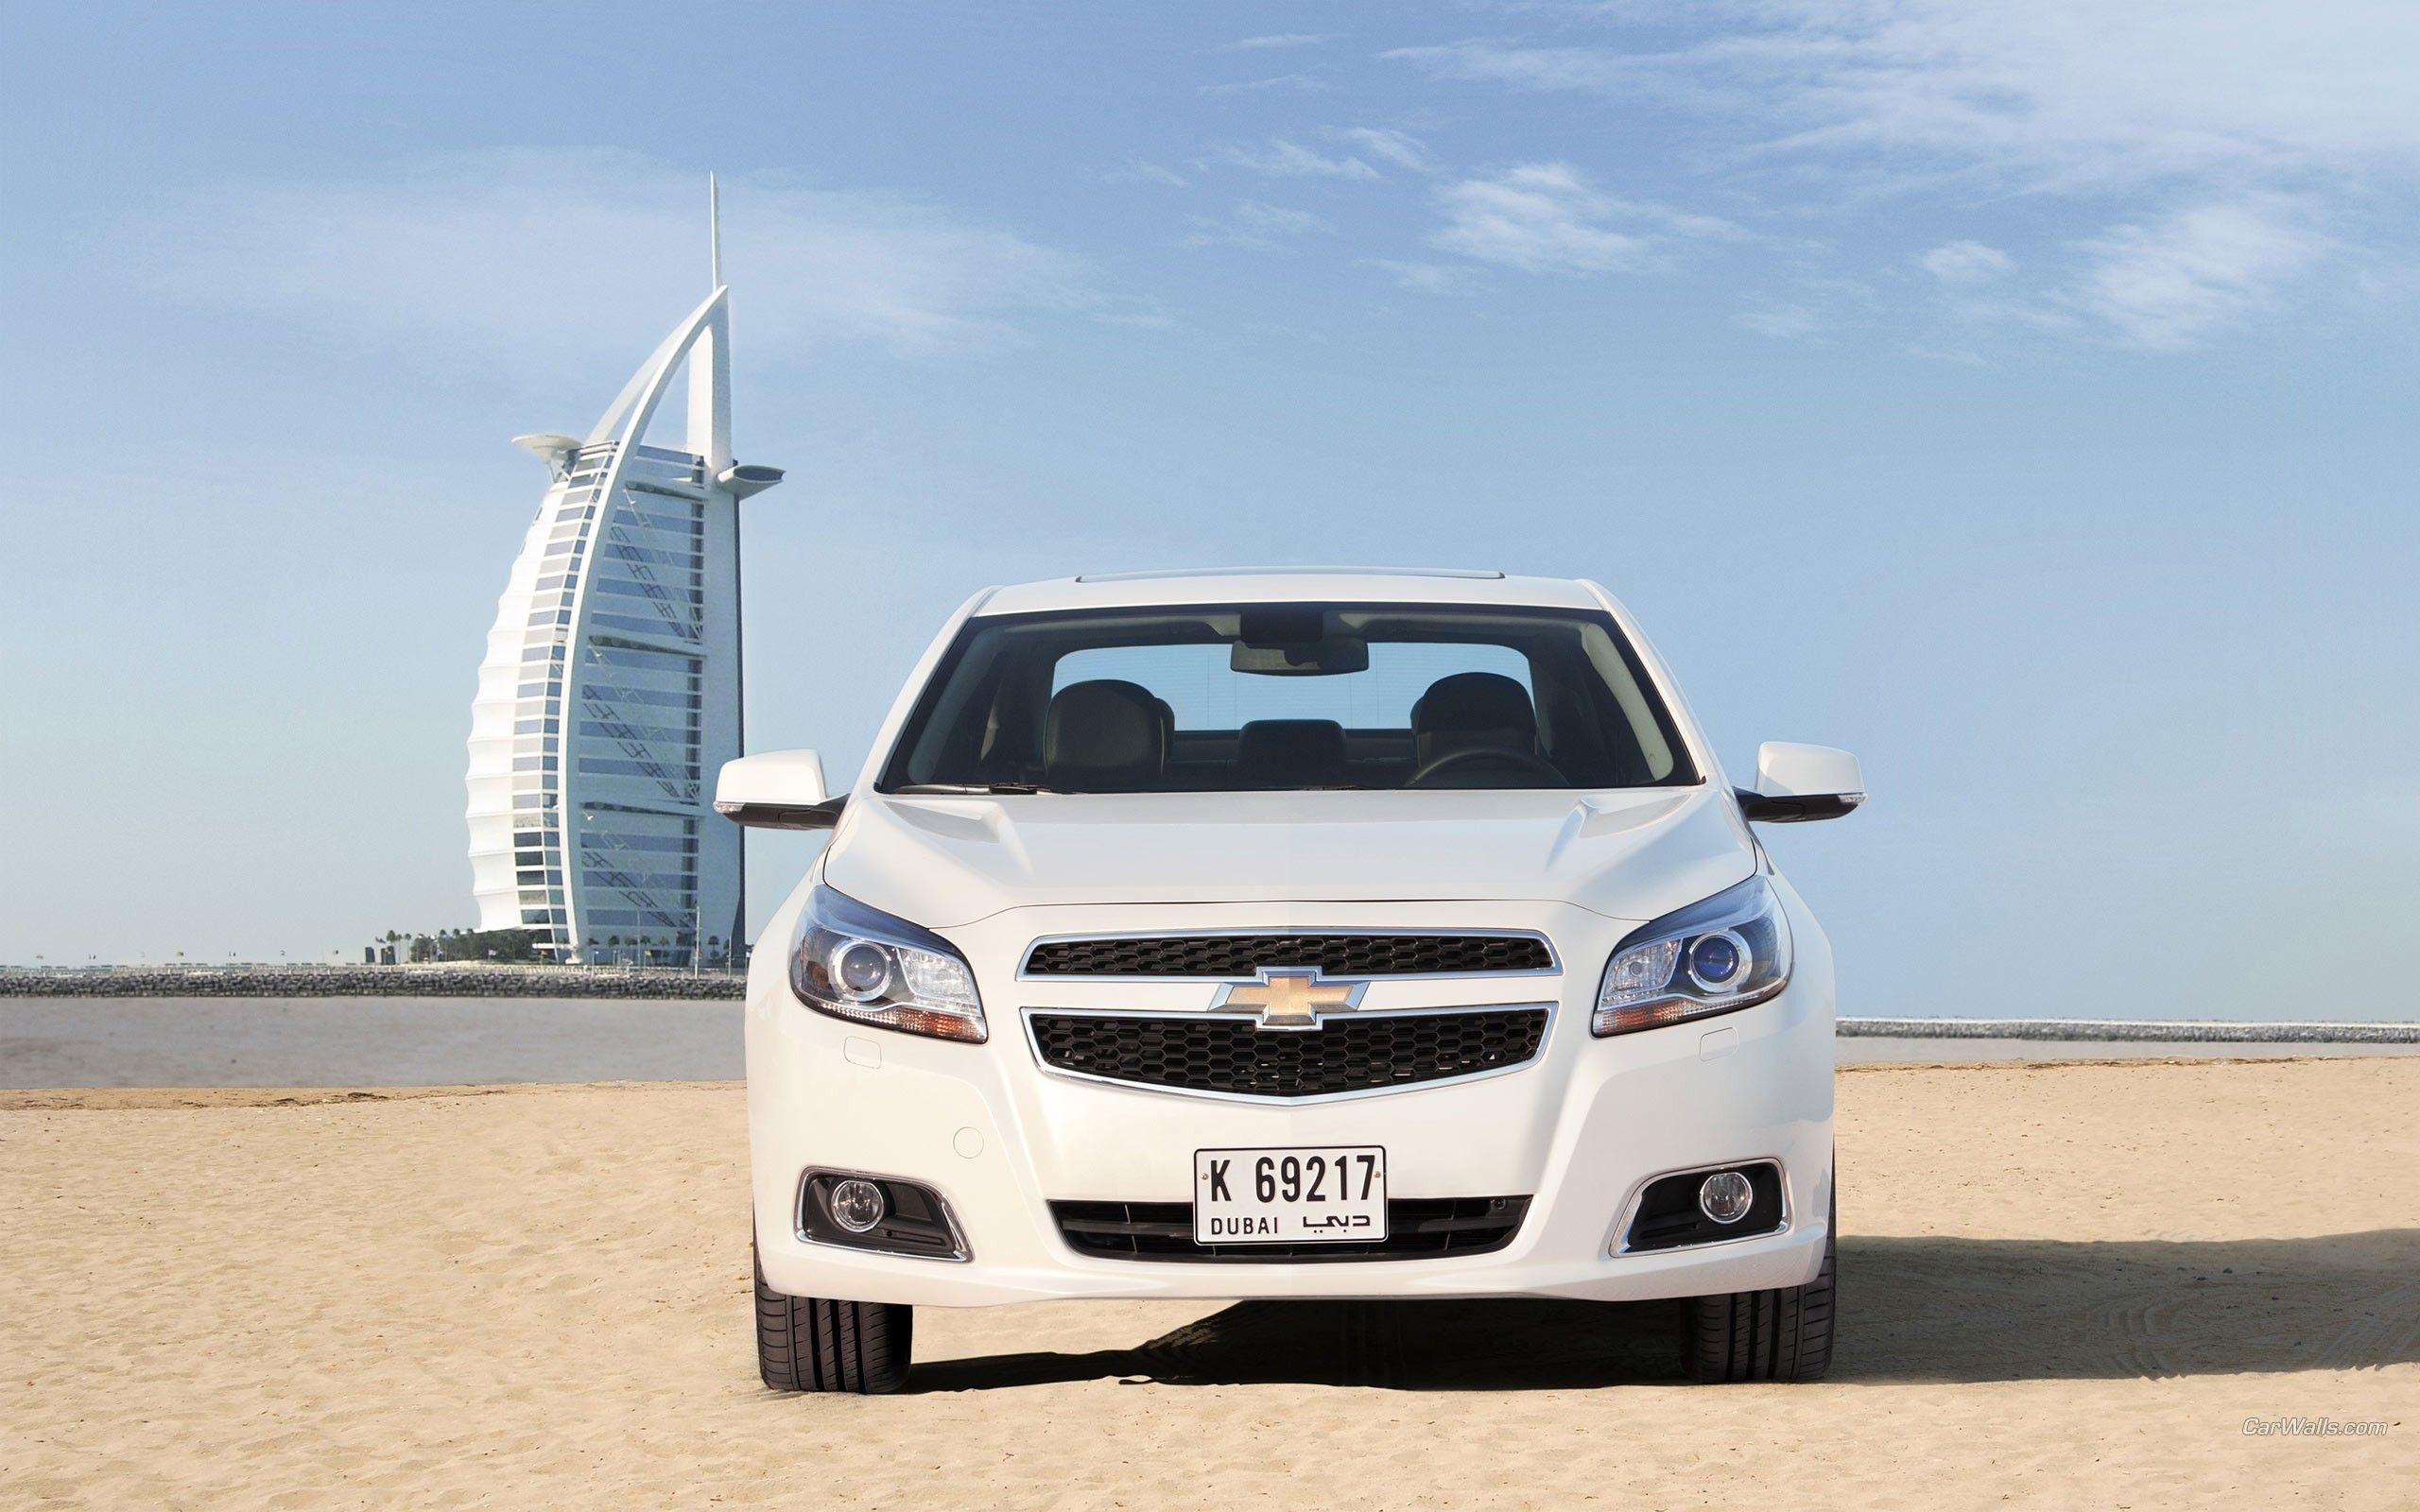 Chevrolet car in Dubai wallpapers and images - wallpapers